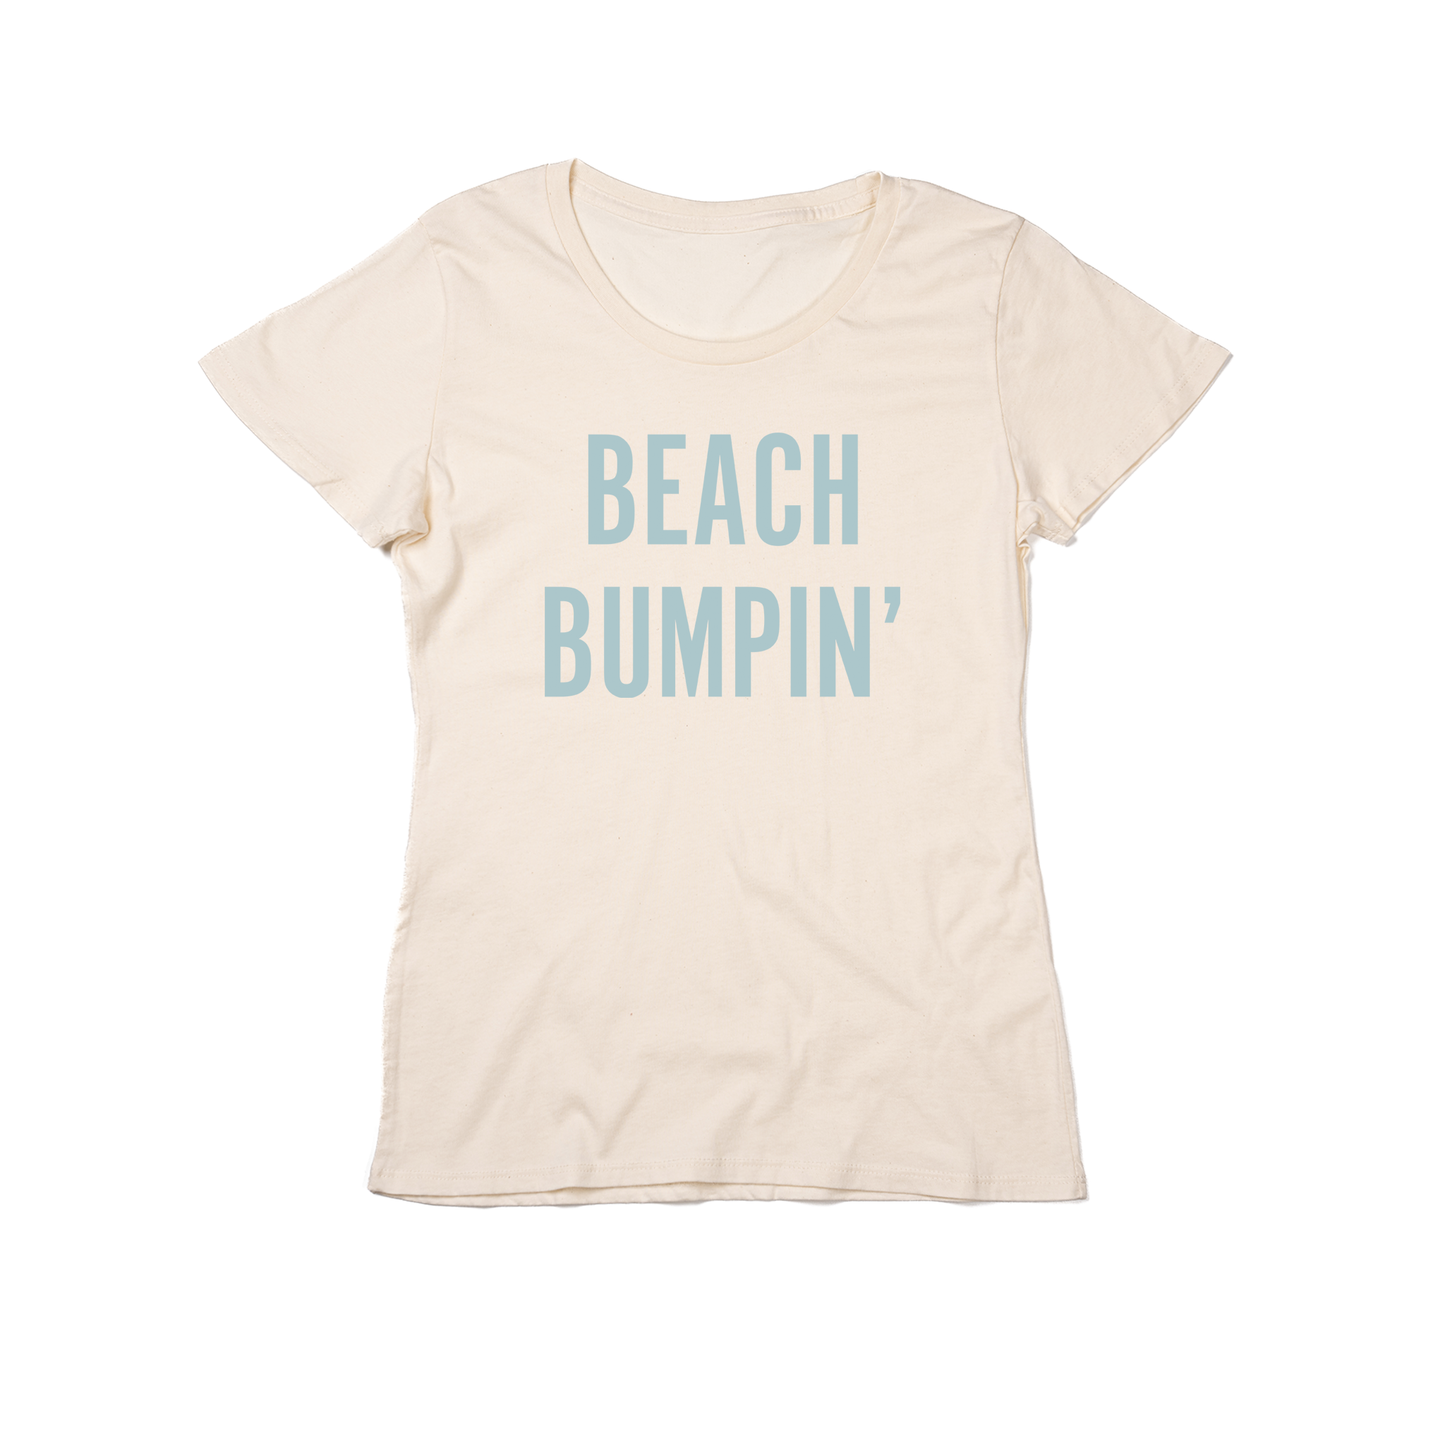 Beach Bumpin' (Sky) - Women's Fitted Tee (Natural)